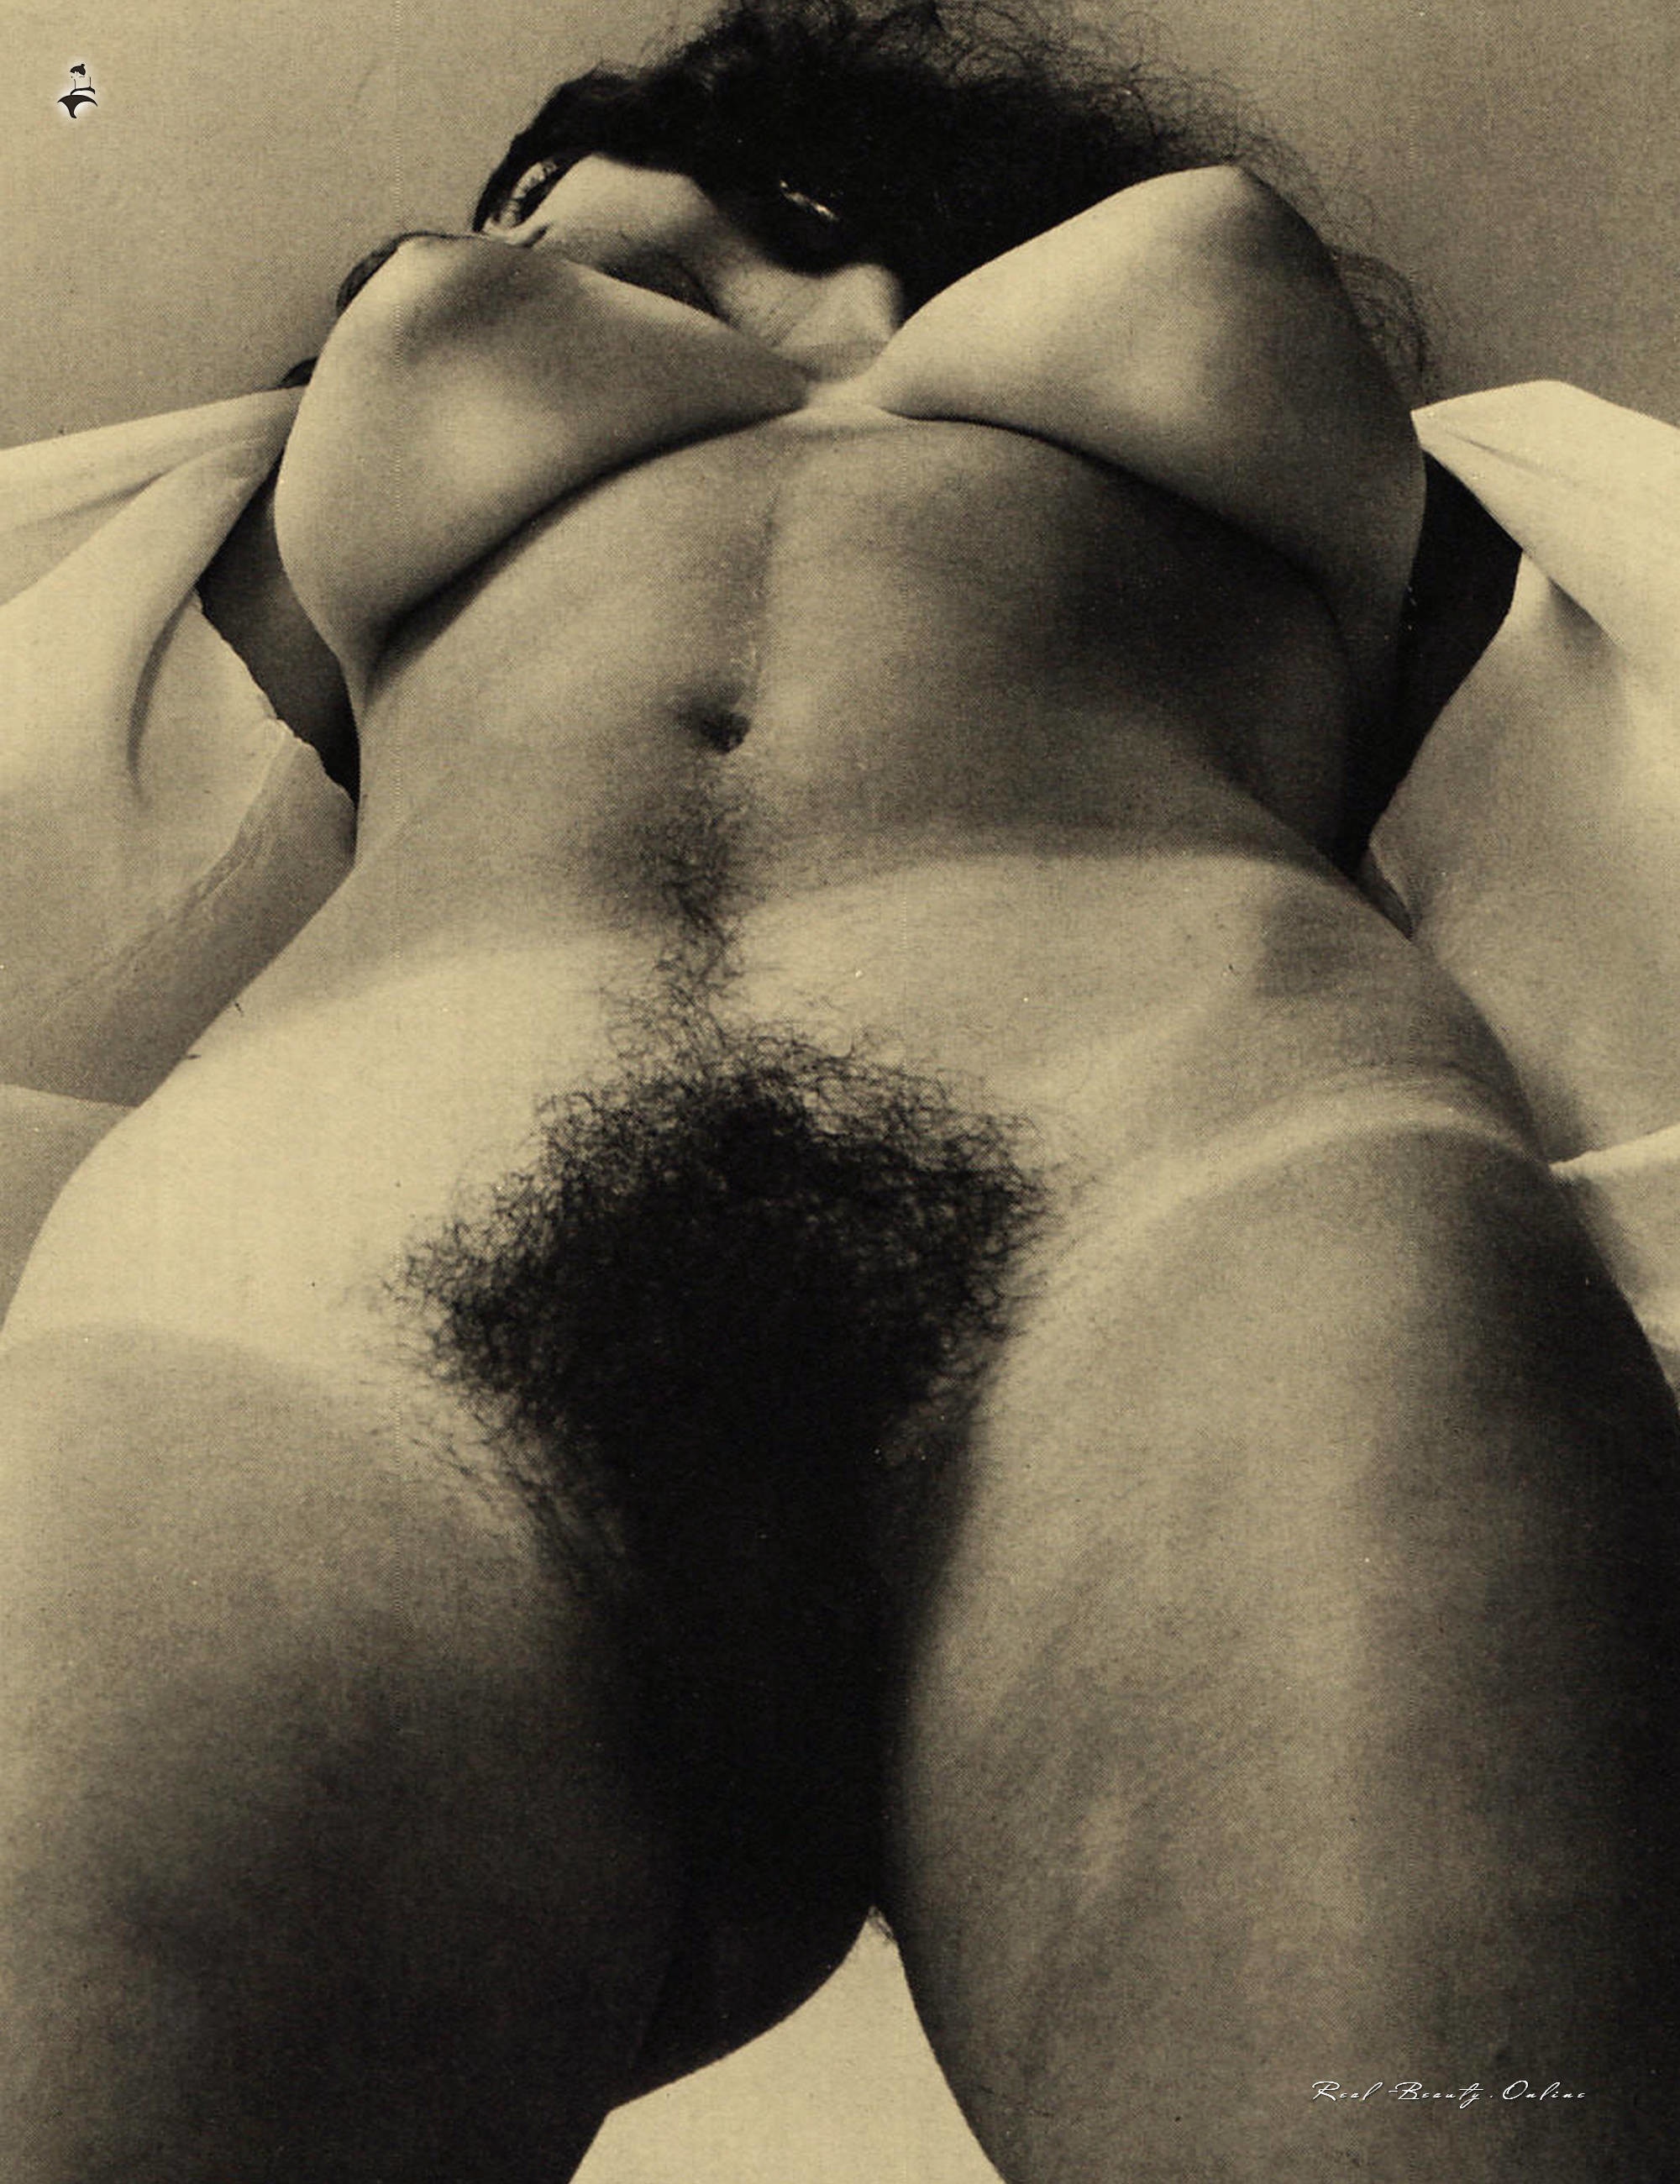 Black And White Retro Vintage Hairy Pussy